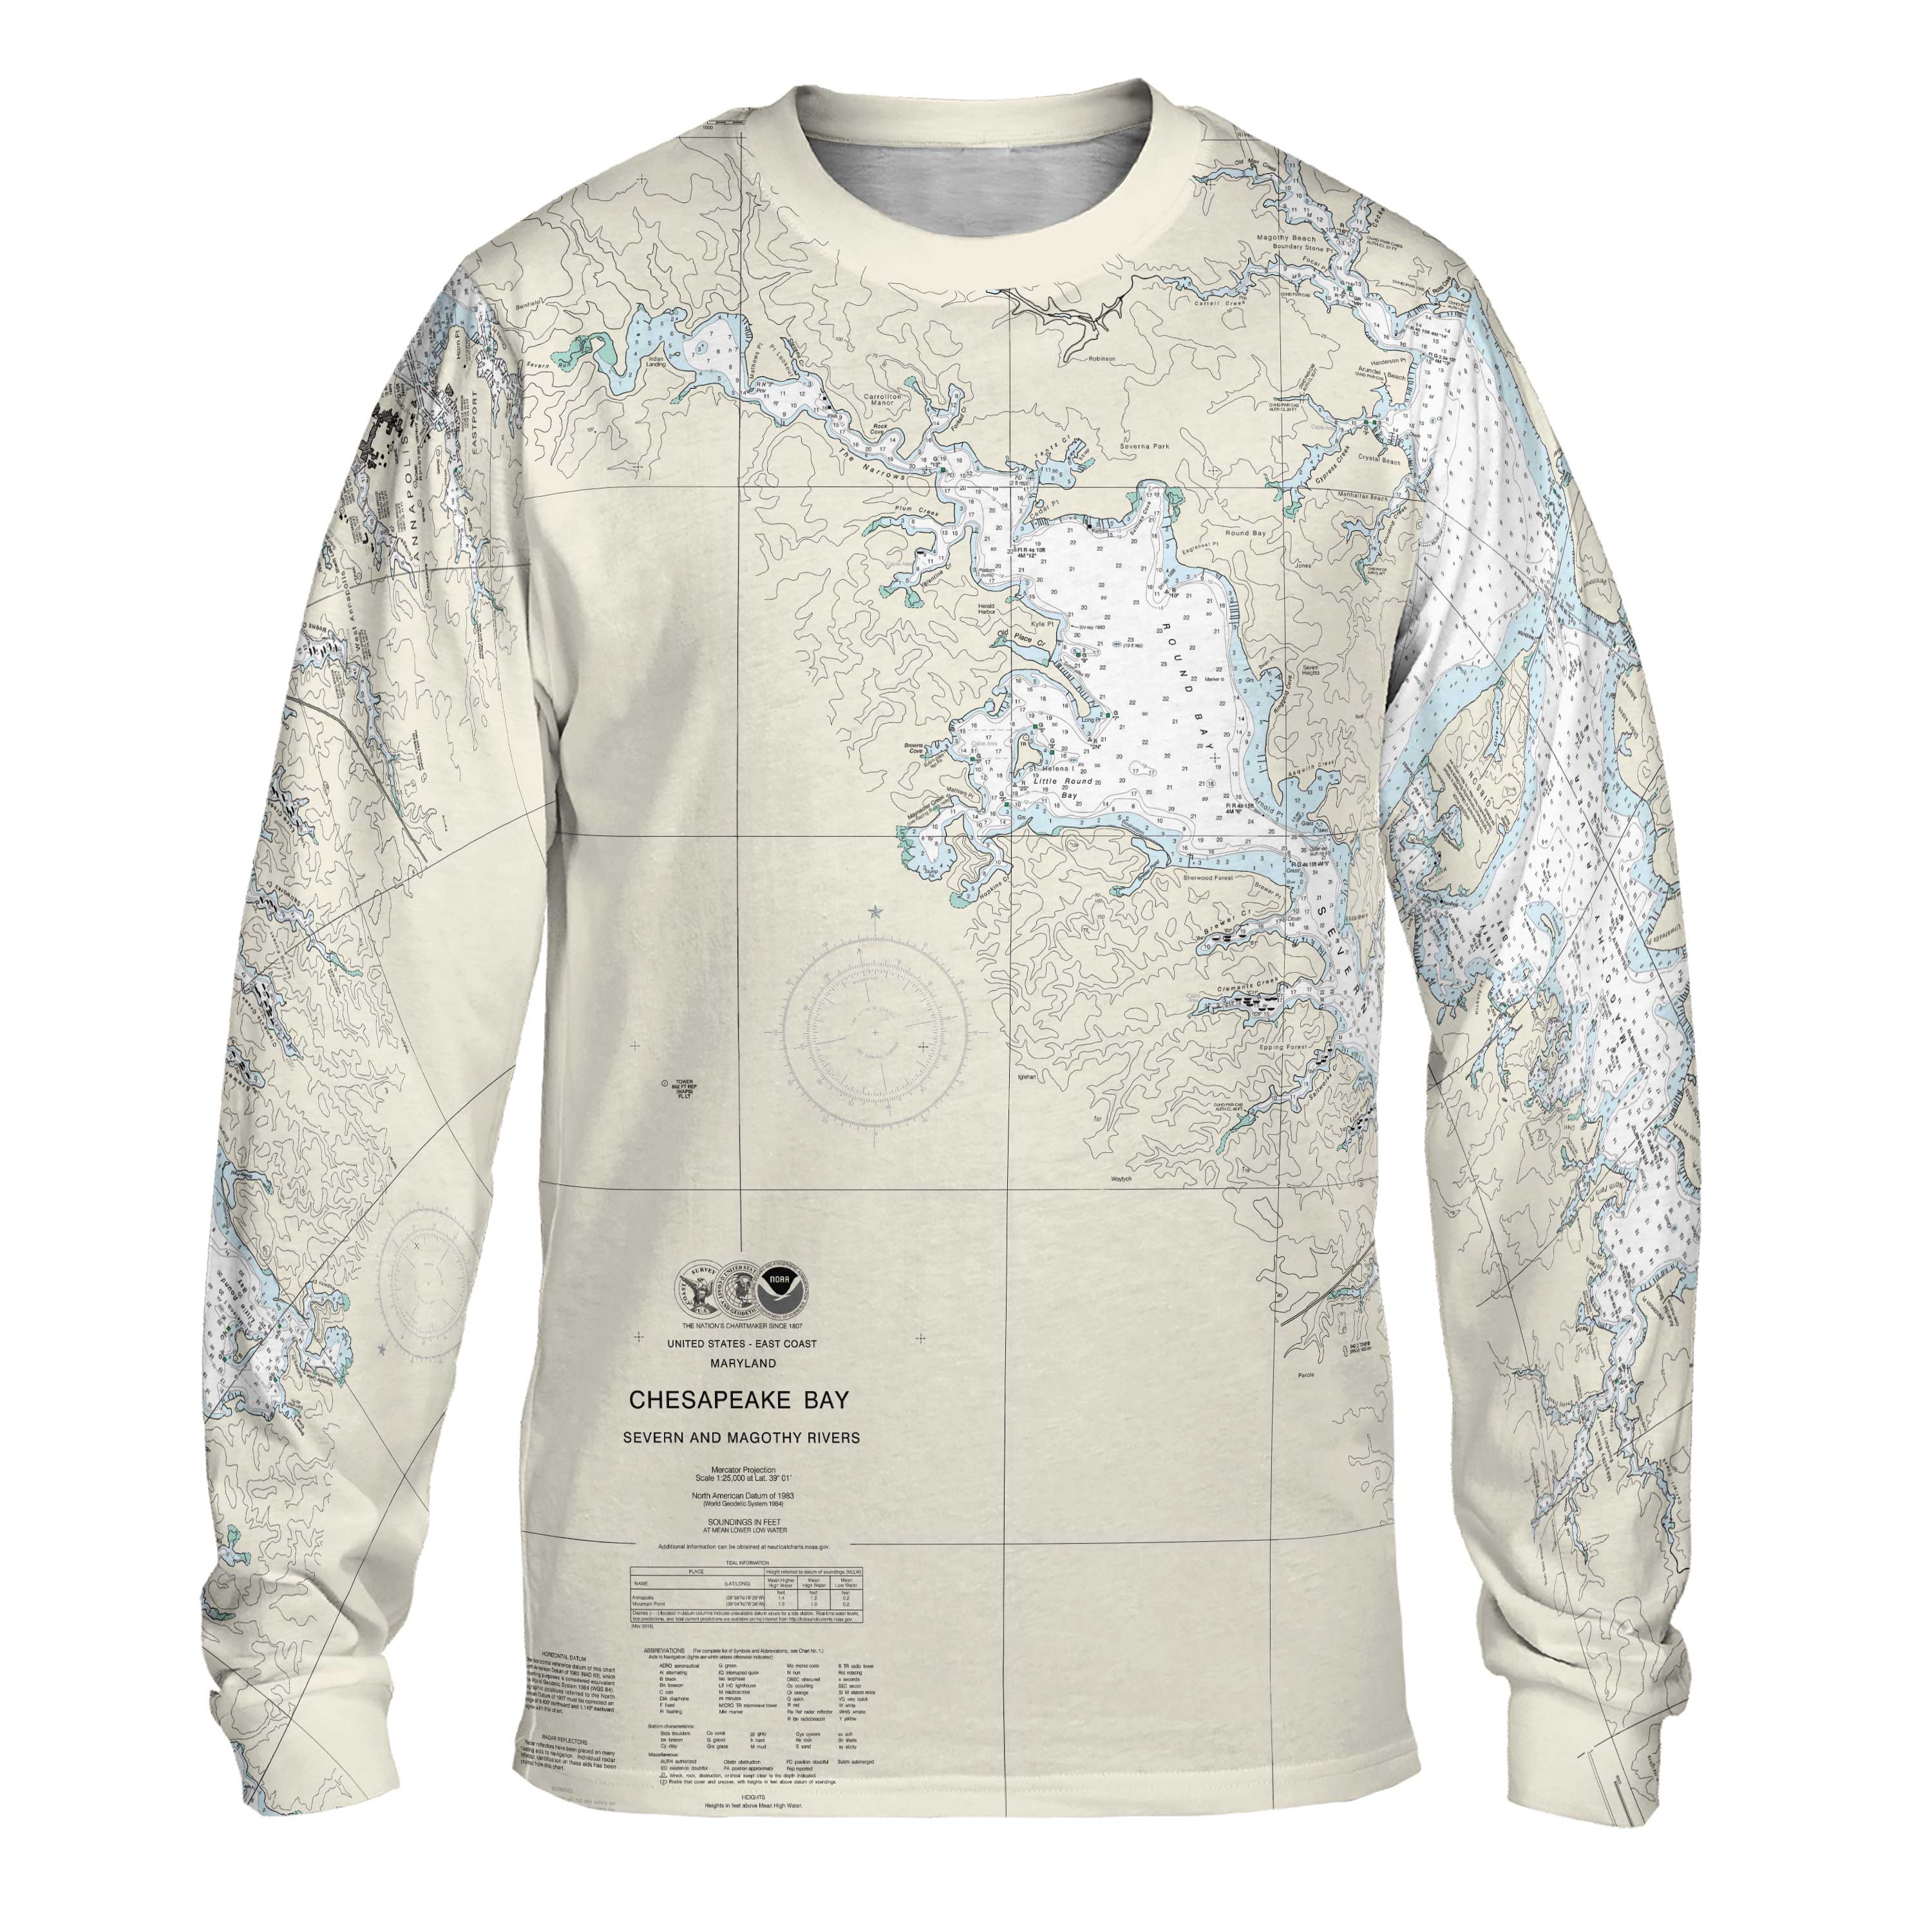 The Severn and Magothy Rivers Long Sleeve Performance Tee